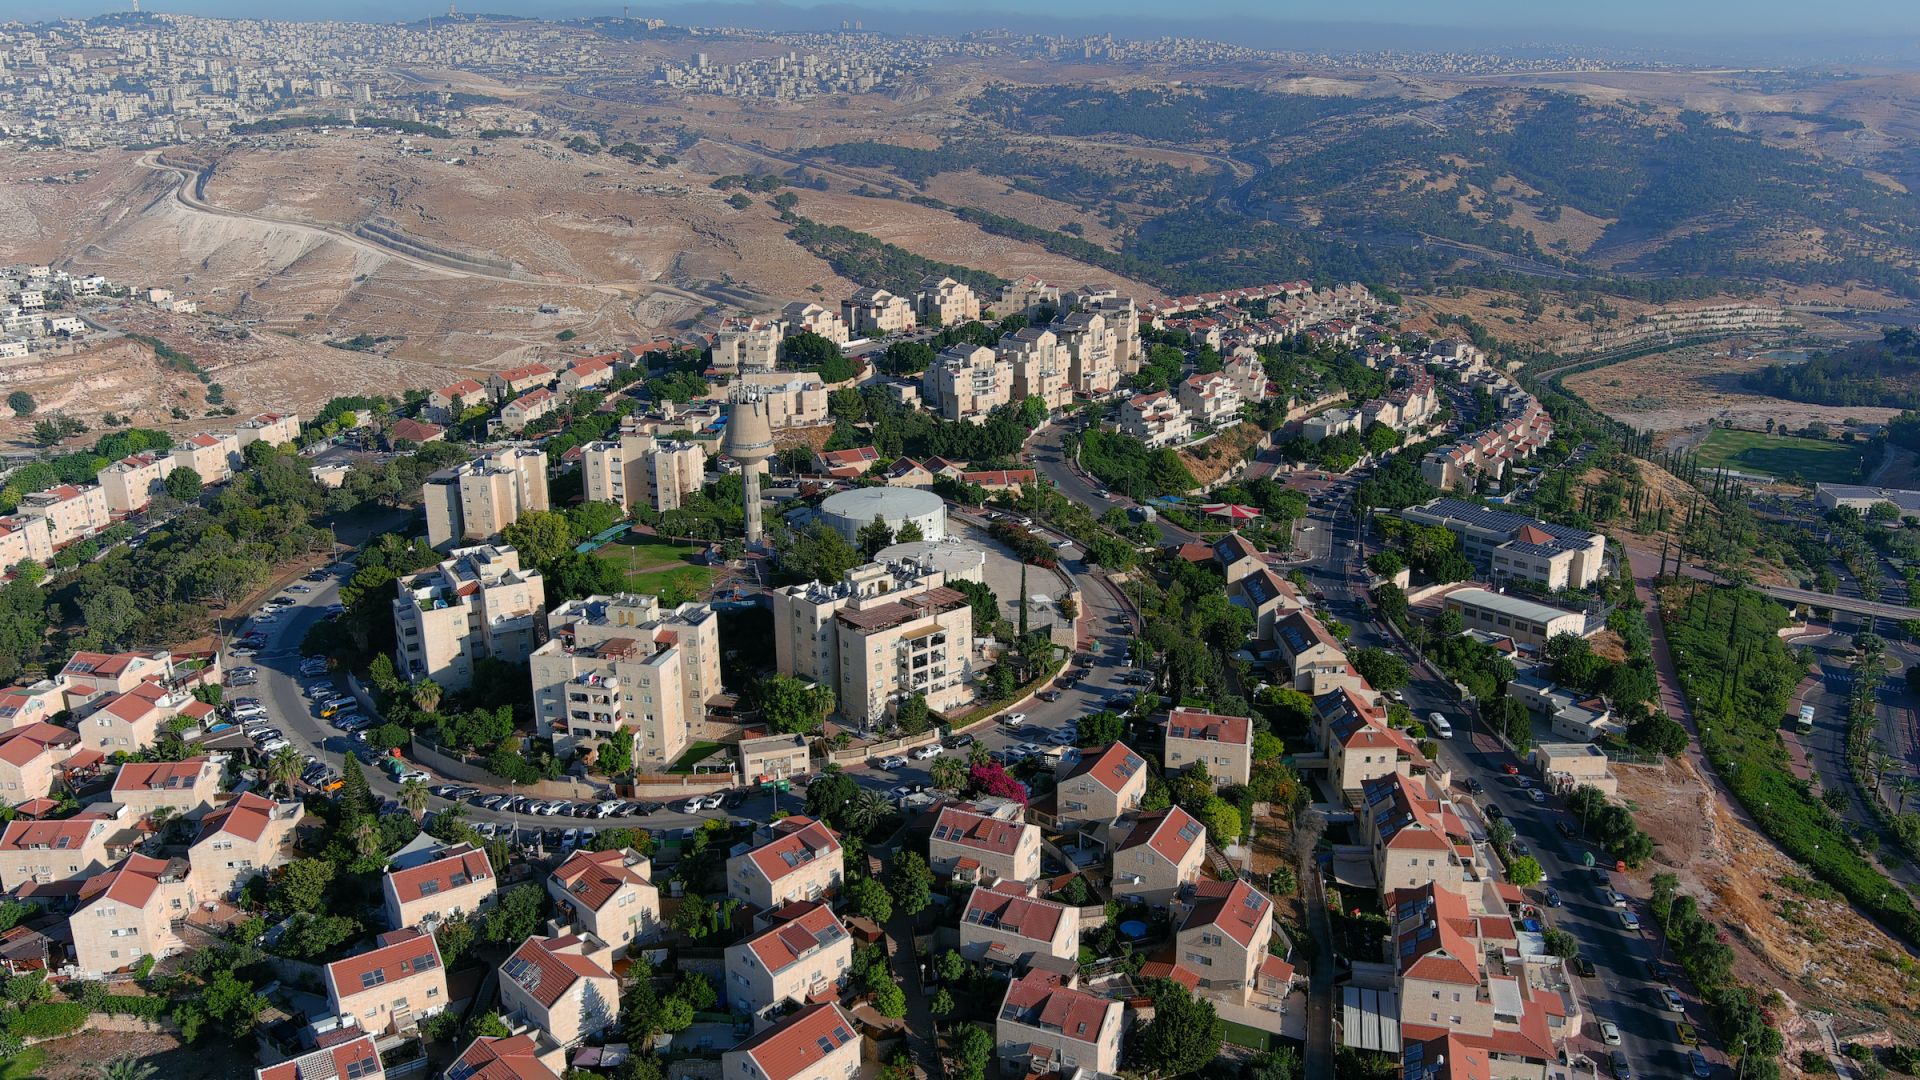 An aerial view shows the Jewish settlement of Maale Adumim in the Israeli-occupied West Bank, June 29, 2020. [Ilan Rosenberg/REUTERS]